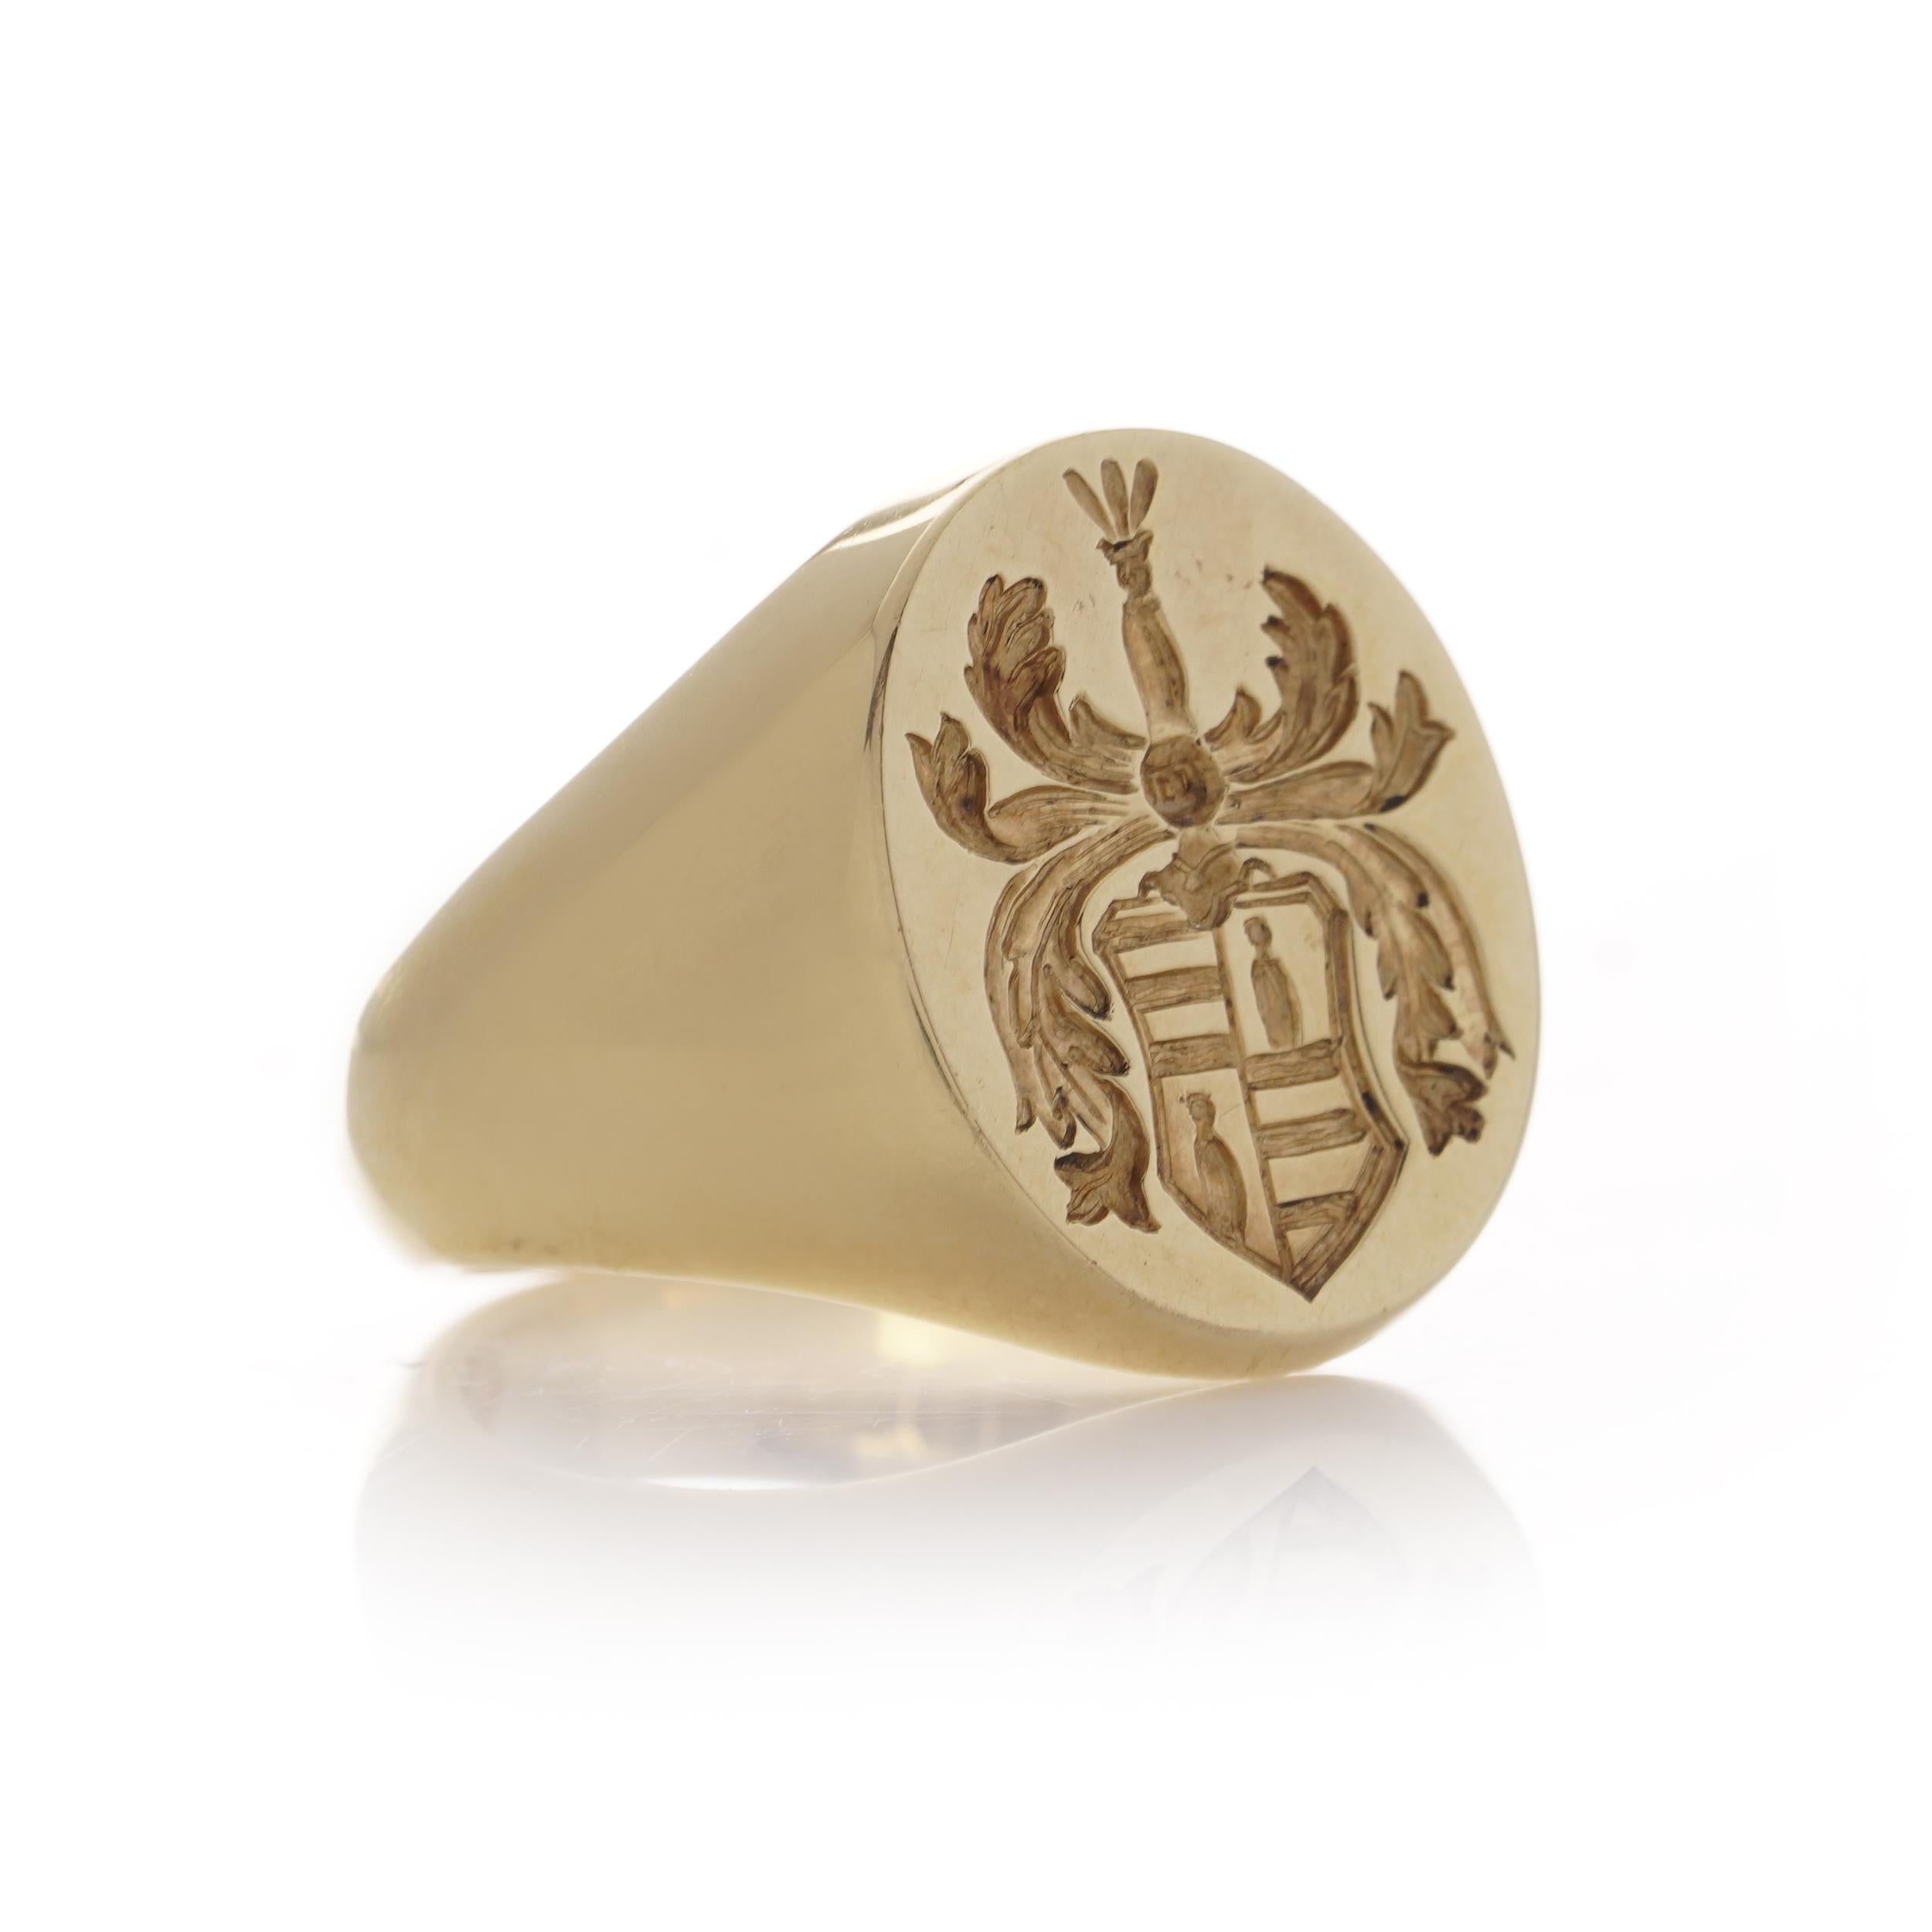 Vintage 18kt. yellow gold signet ring with a coat of arms.

Made in England, London, 1991
Fully hallmarked.
Maker: W&G

Dimensions -
Ring Size: 2.2 x 2.1 x 1.6 cm
Finger Size (UK) = J (EU) = 50 (US) = 5

Weight: 13.7 grams

Condition: Pre-owned,